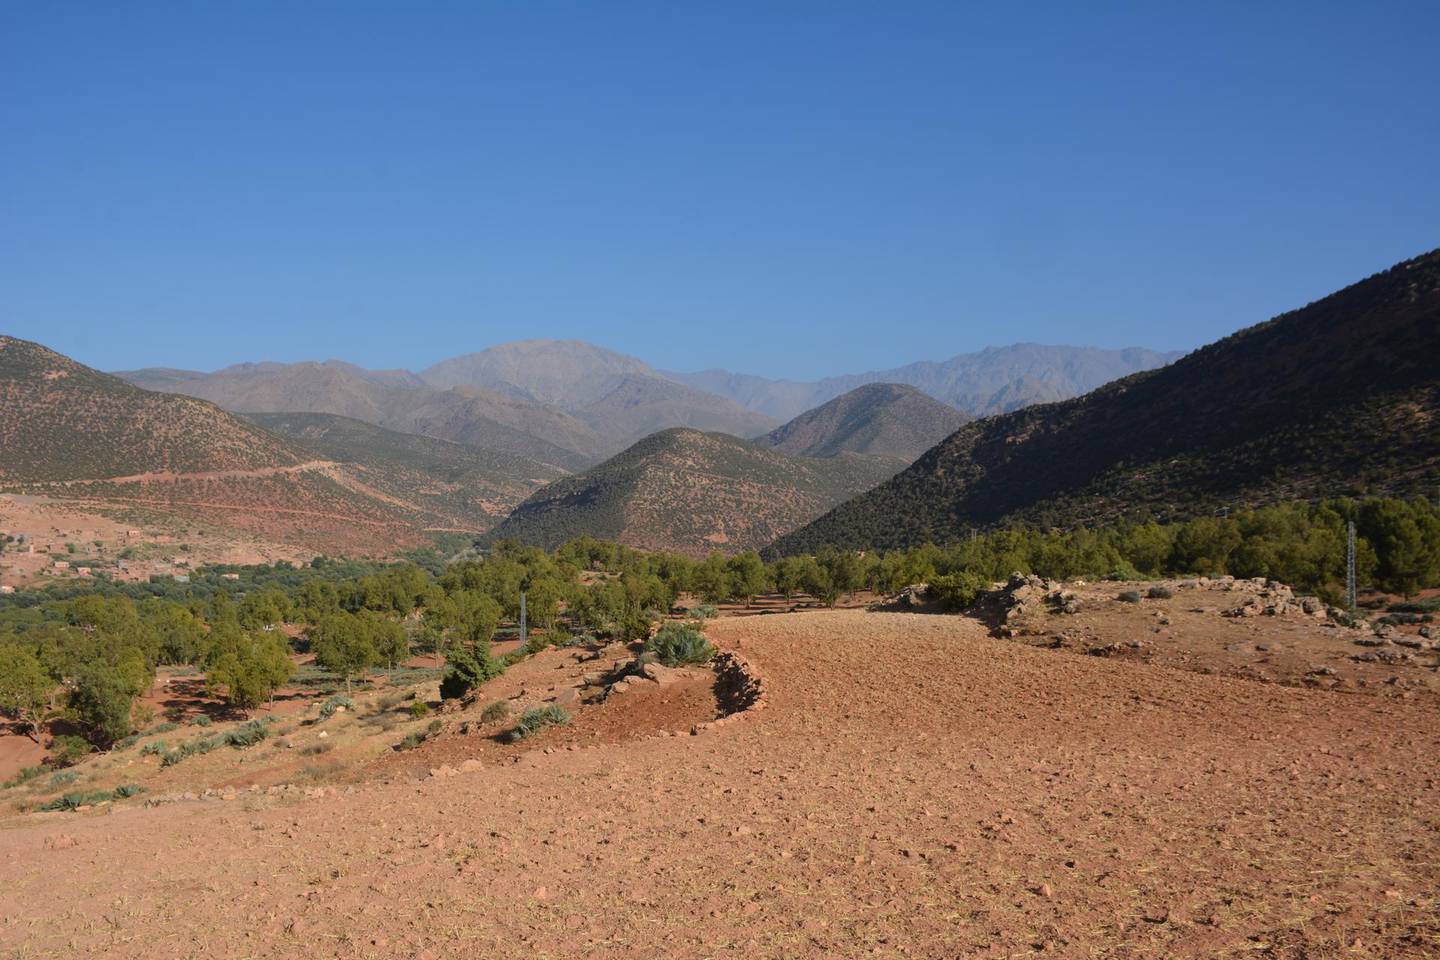 The countryside near Kasbah Tamadot in the Atlas Mountains. Rosemary Behan